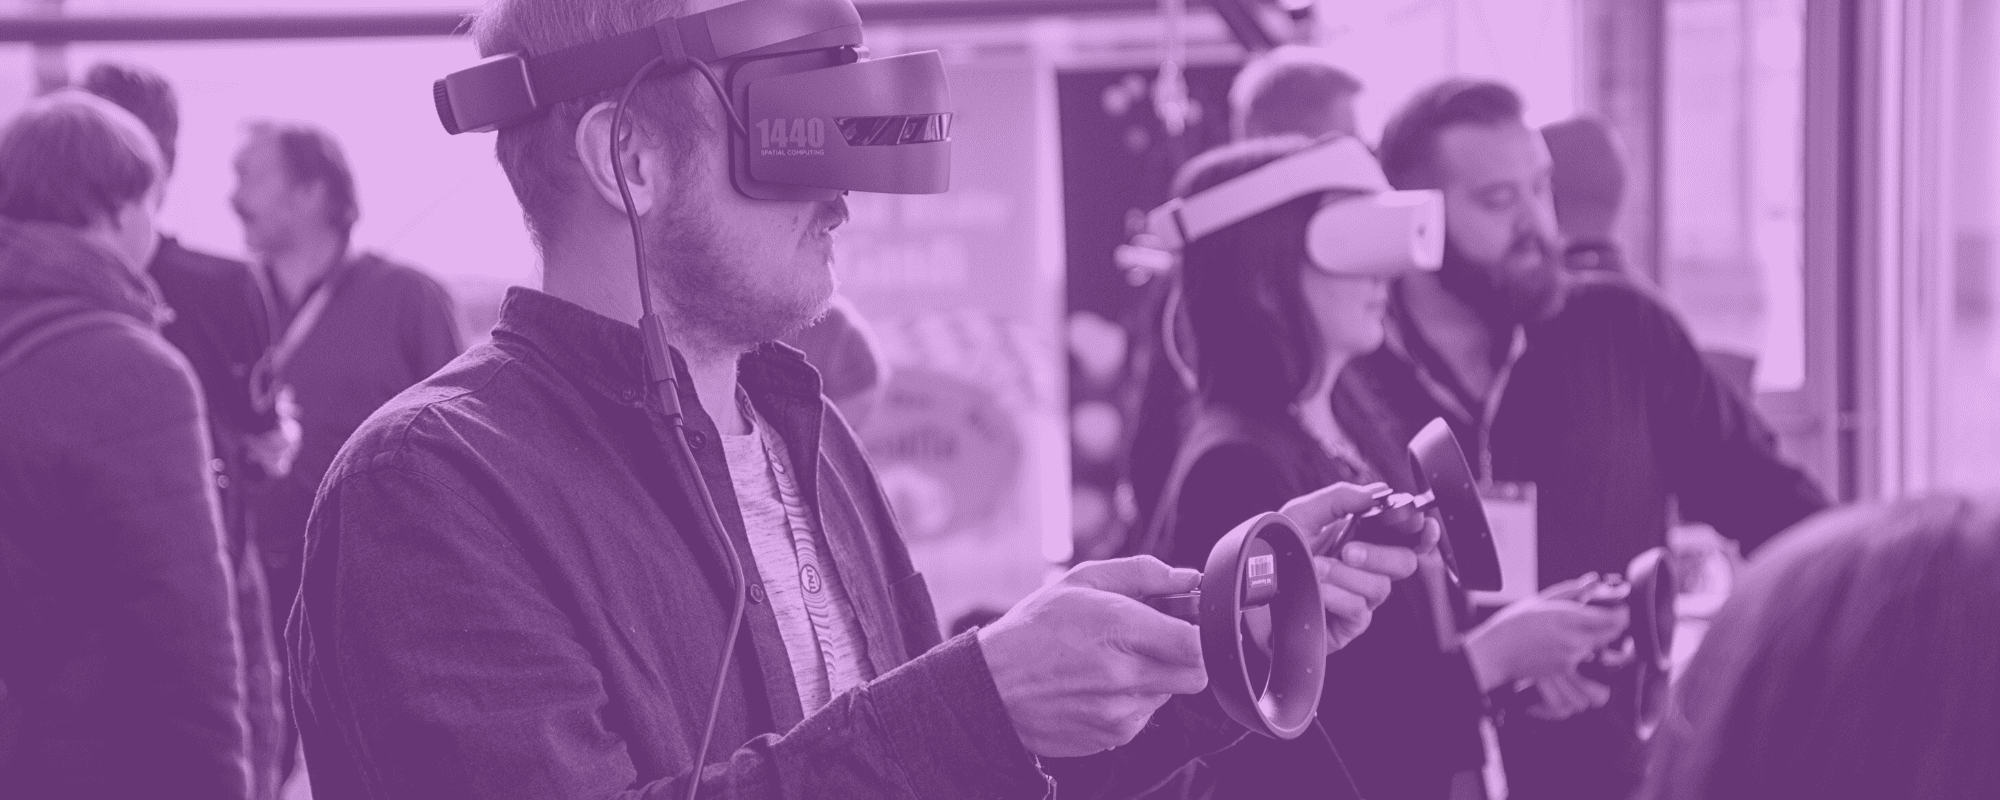 ar and vr for events